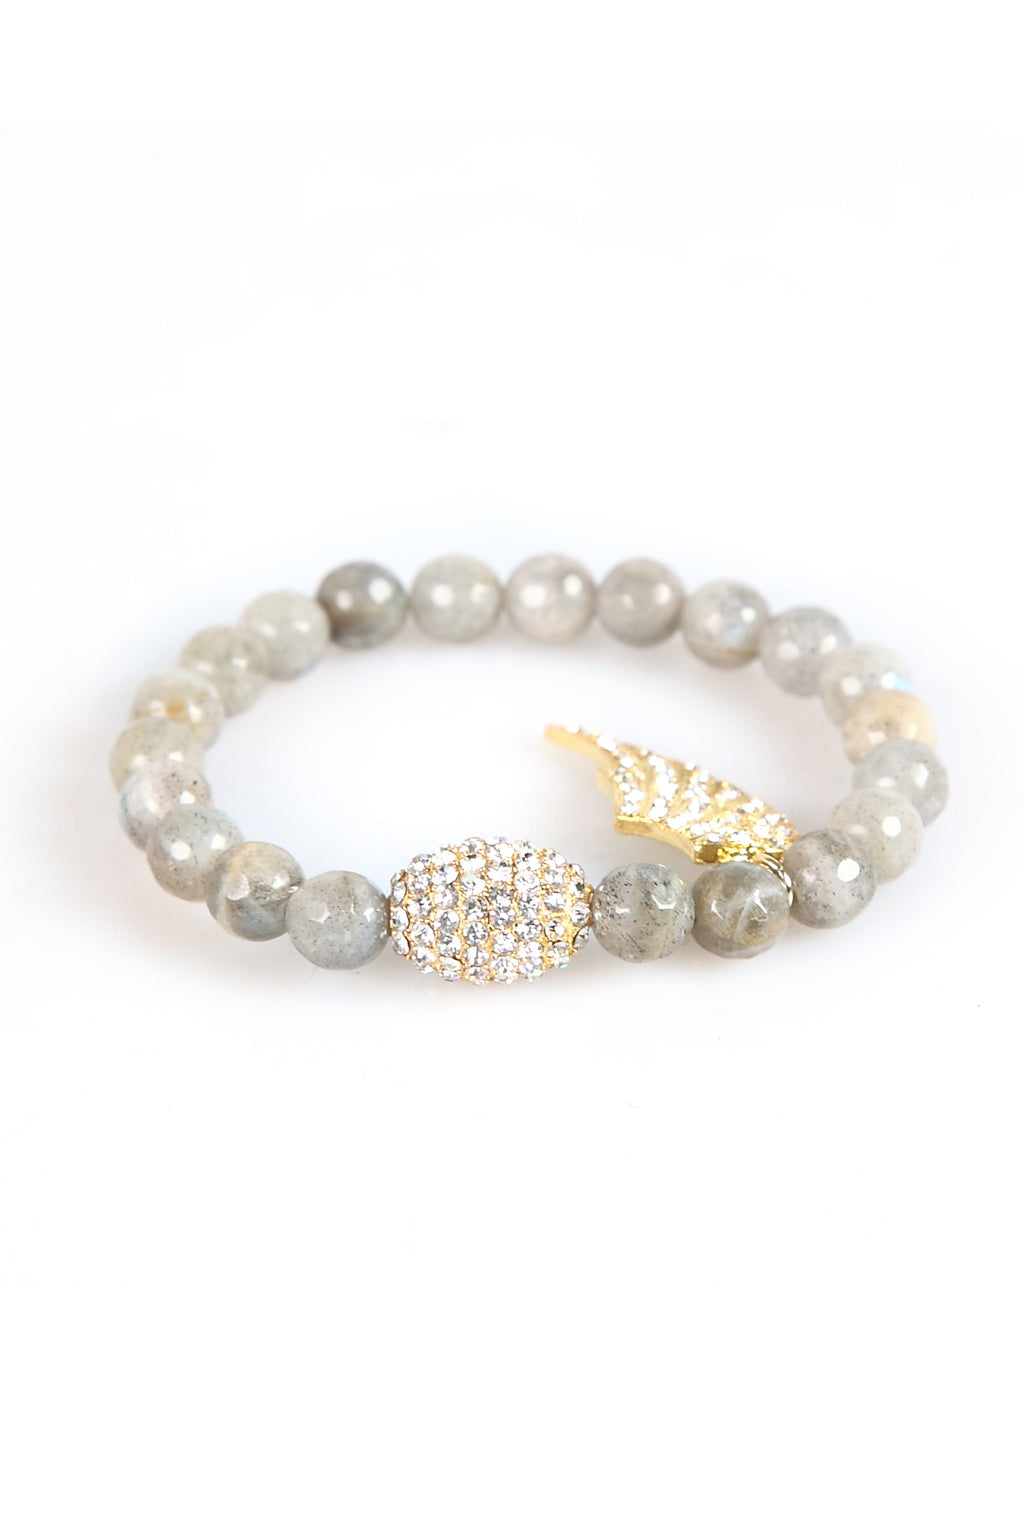 White agate angel beaded bracelet studded with CZ crystals.